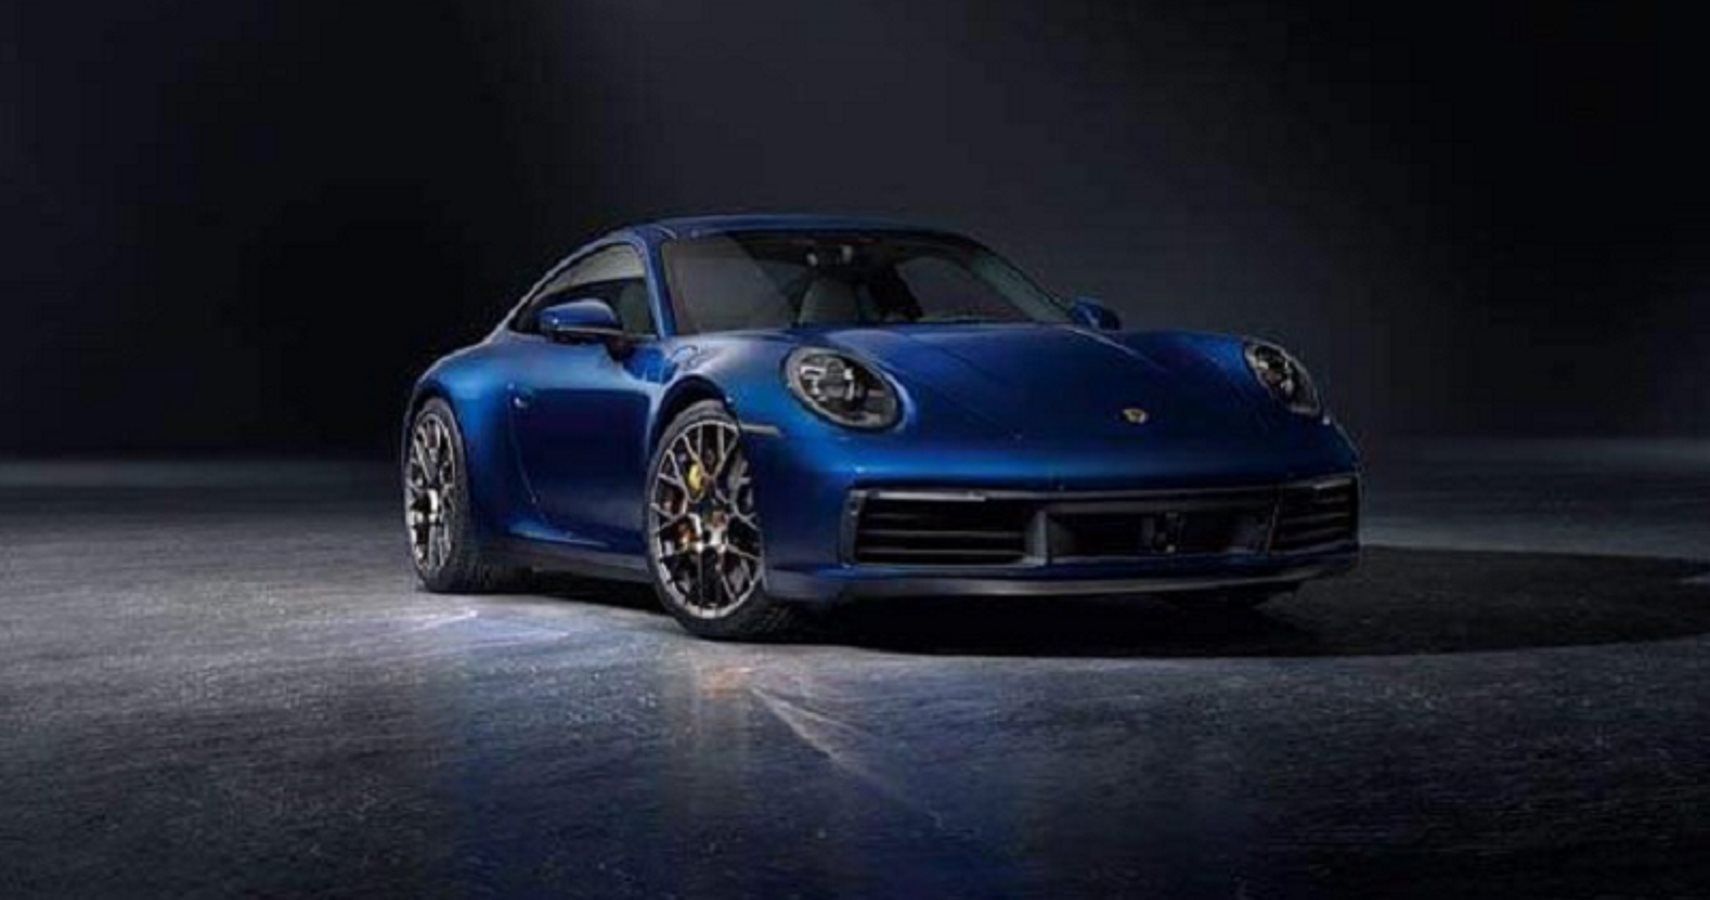 Press Photos Of The 2019 Porsche 911 Leaked Ahead Of Schedule